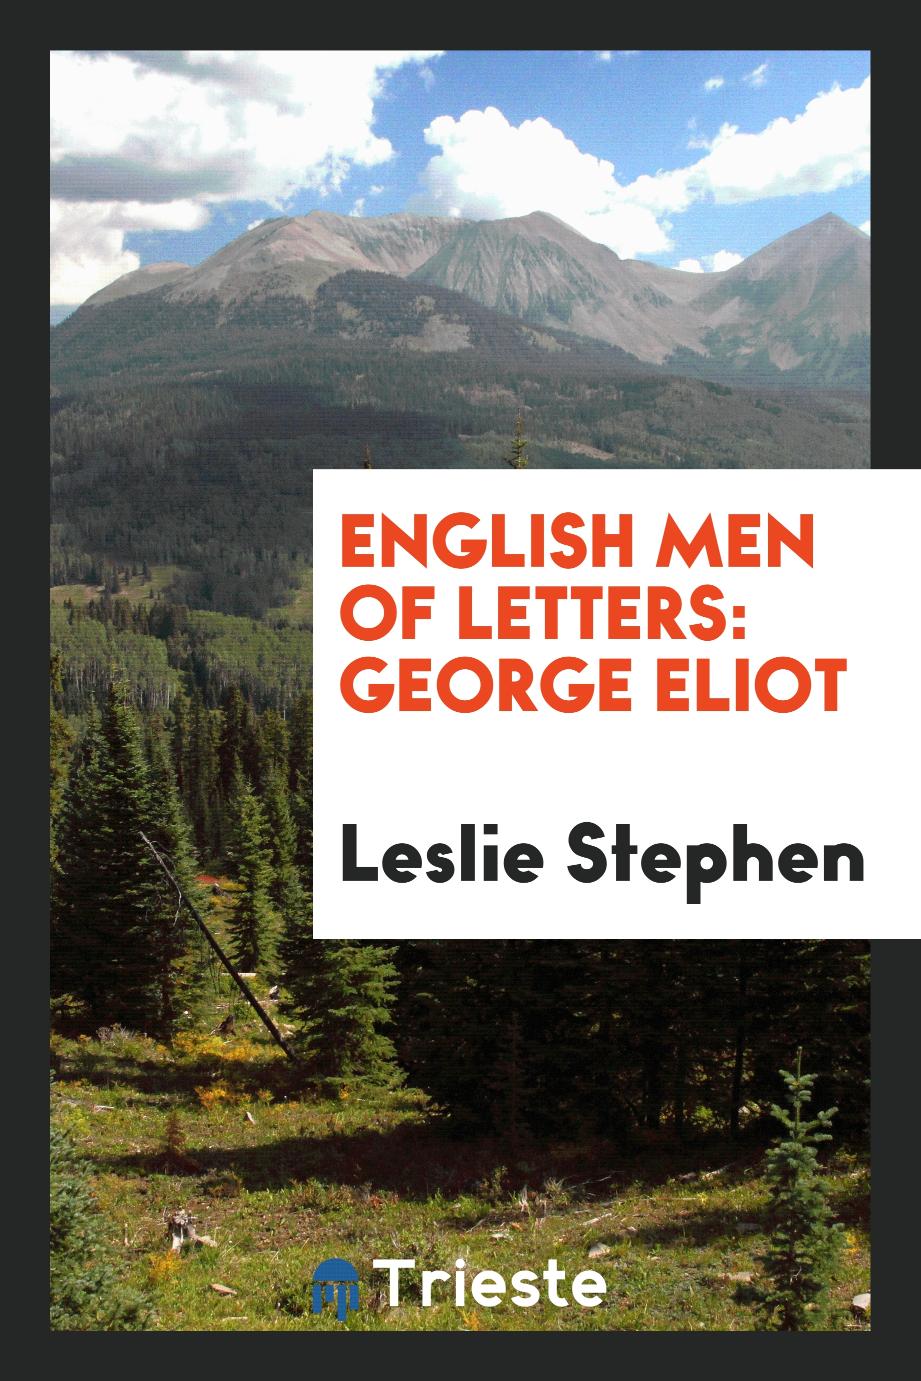 English men of letters: George Eliot